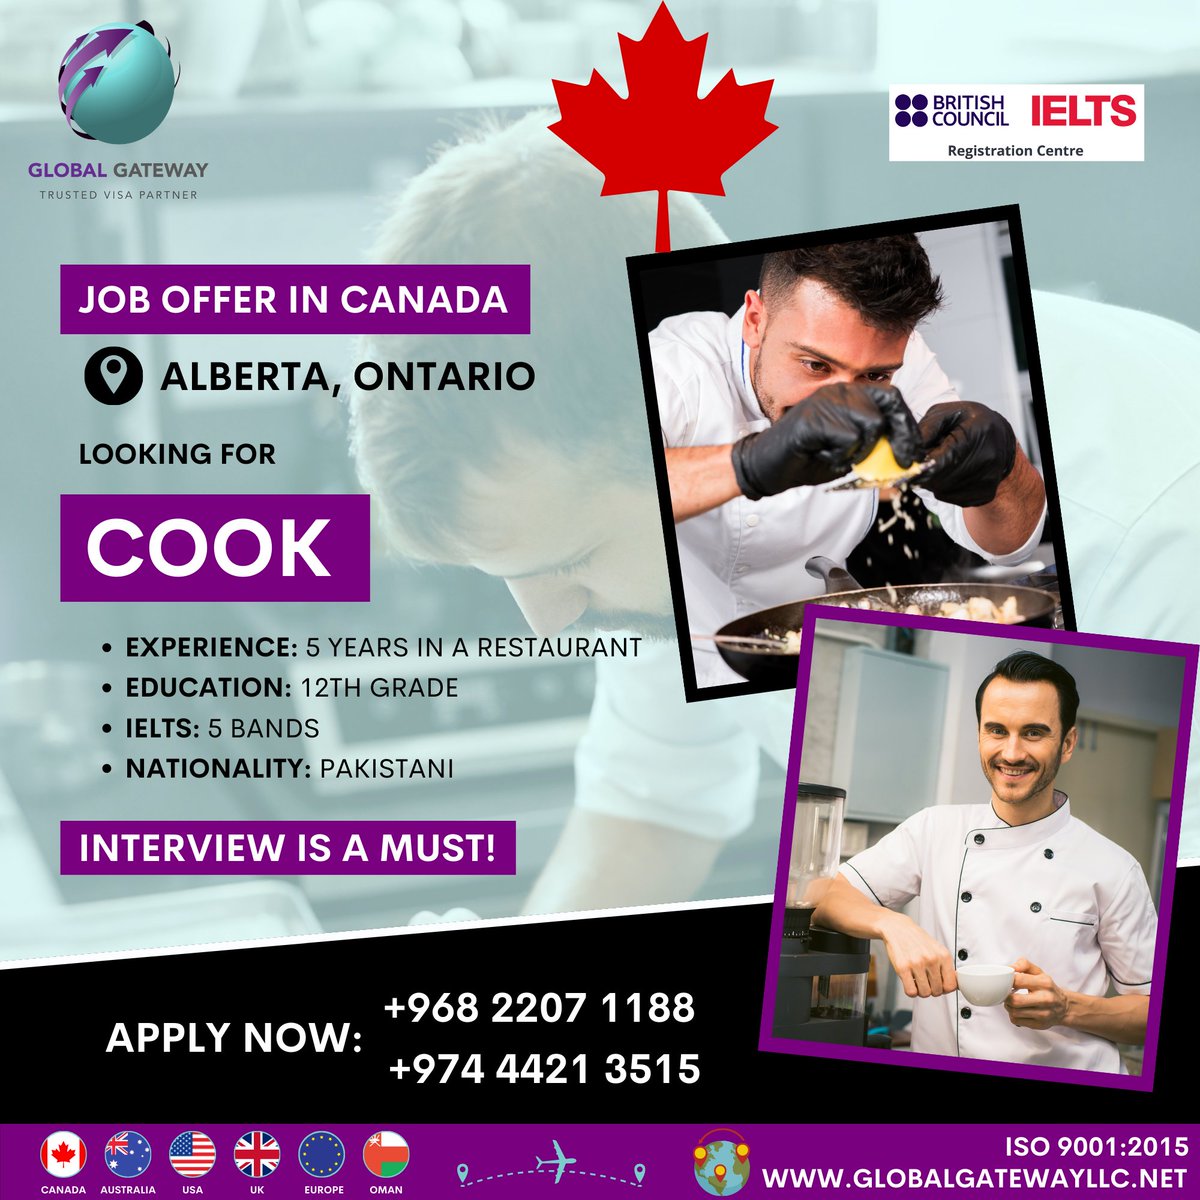 Calling all experienced cooks in Alberta and Ontario, Canada! 🍳
Pakistani nationality? Even better!

𝑨𝒑𝒑𝒍𝒚 𝑵𝒐𝒘! 📦💼✨
info@globalgatewayllc.net

#GlobalGateway #Work #Immigration #CookingJobs #CanadaOpportunity #Discount #ExploreAndDiscover